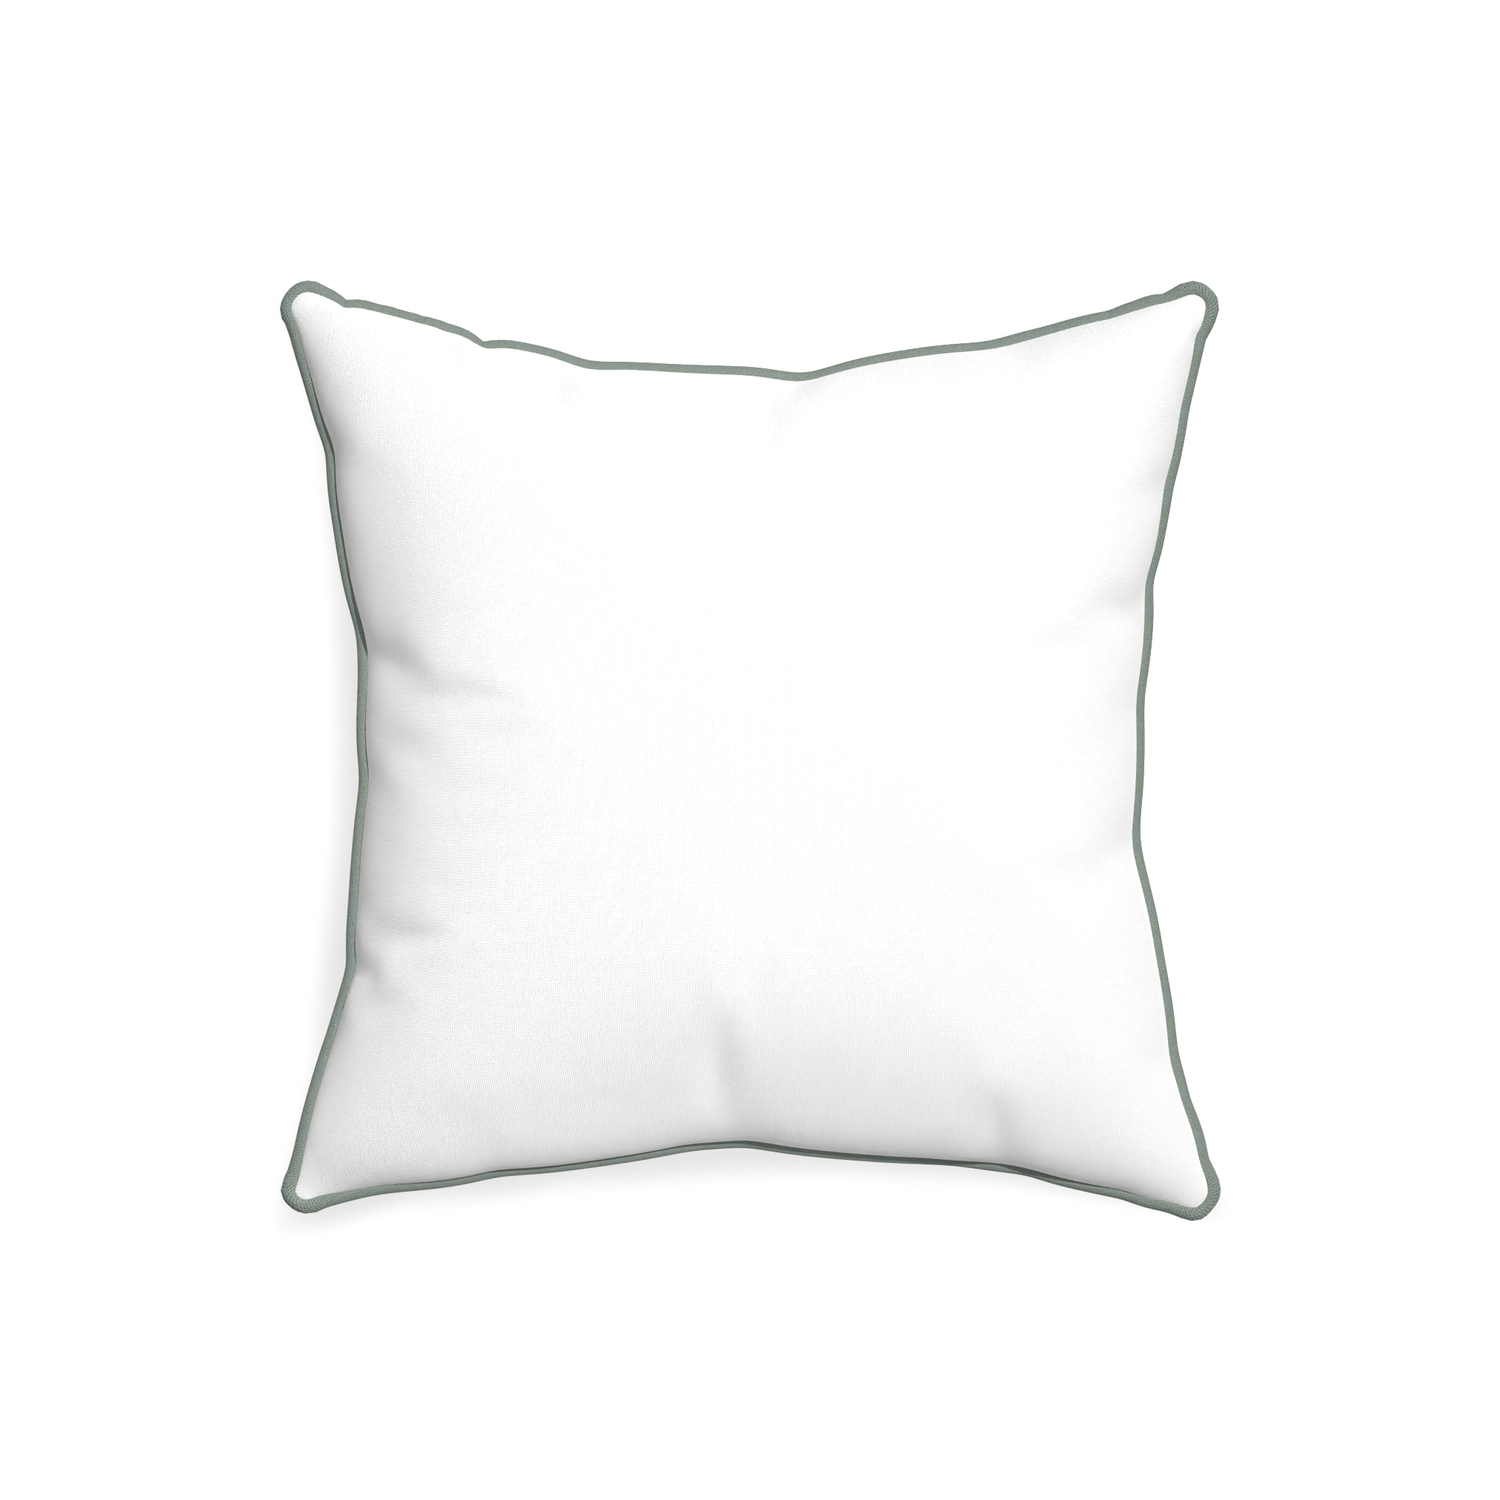 20-square snow custom white cottonpillow with sage piping on white background